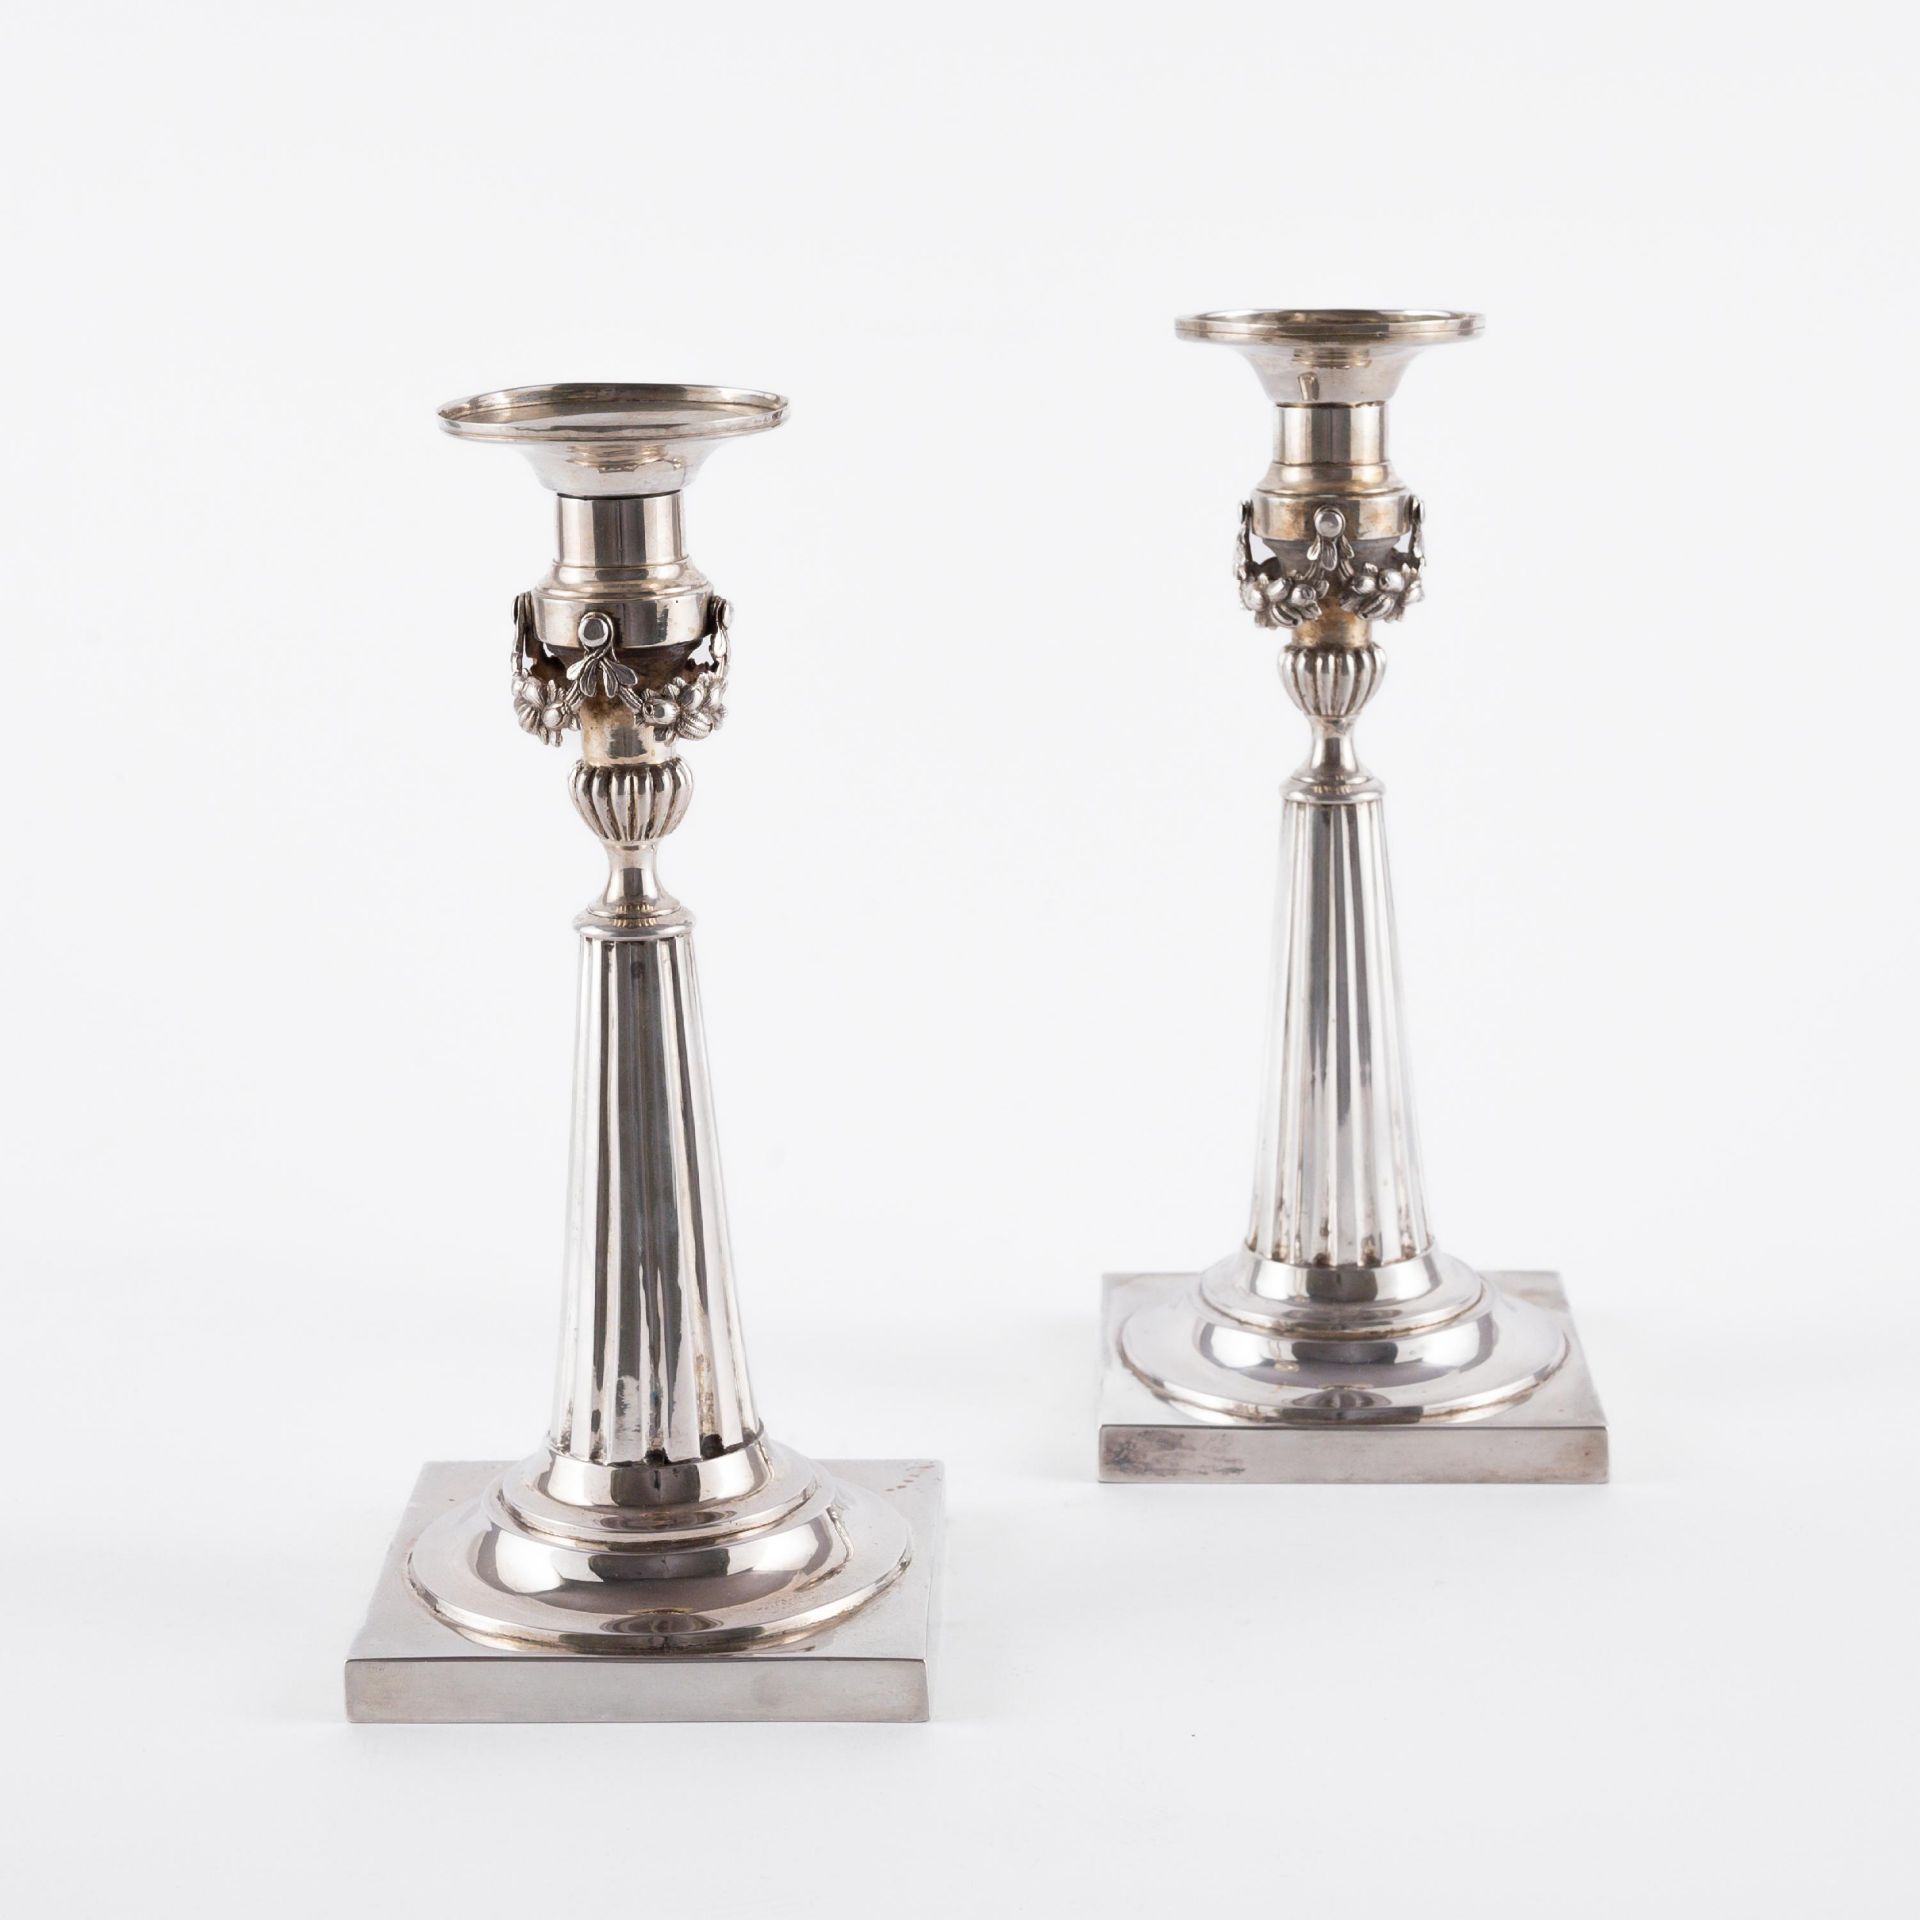 Carl Gottlieb Gröger: PAIR OF SILVER CANDLESTICKS WITH FLUTED SHAFT AND FESTOONS